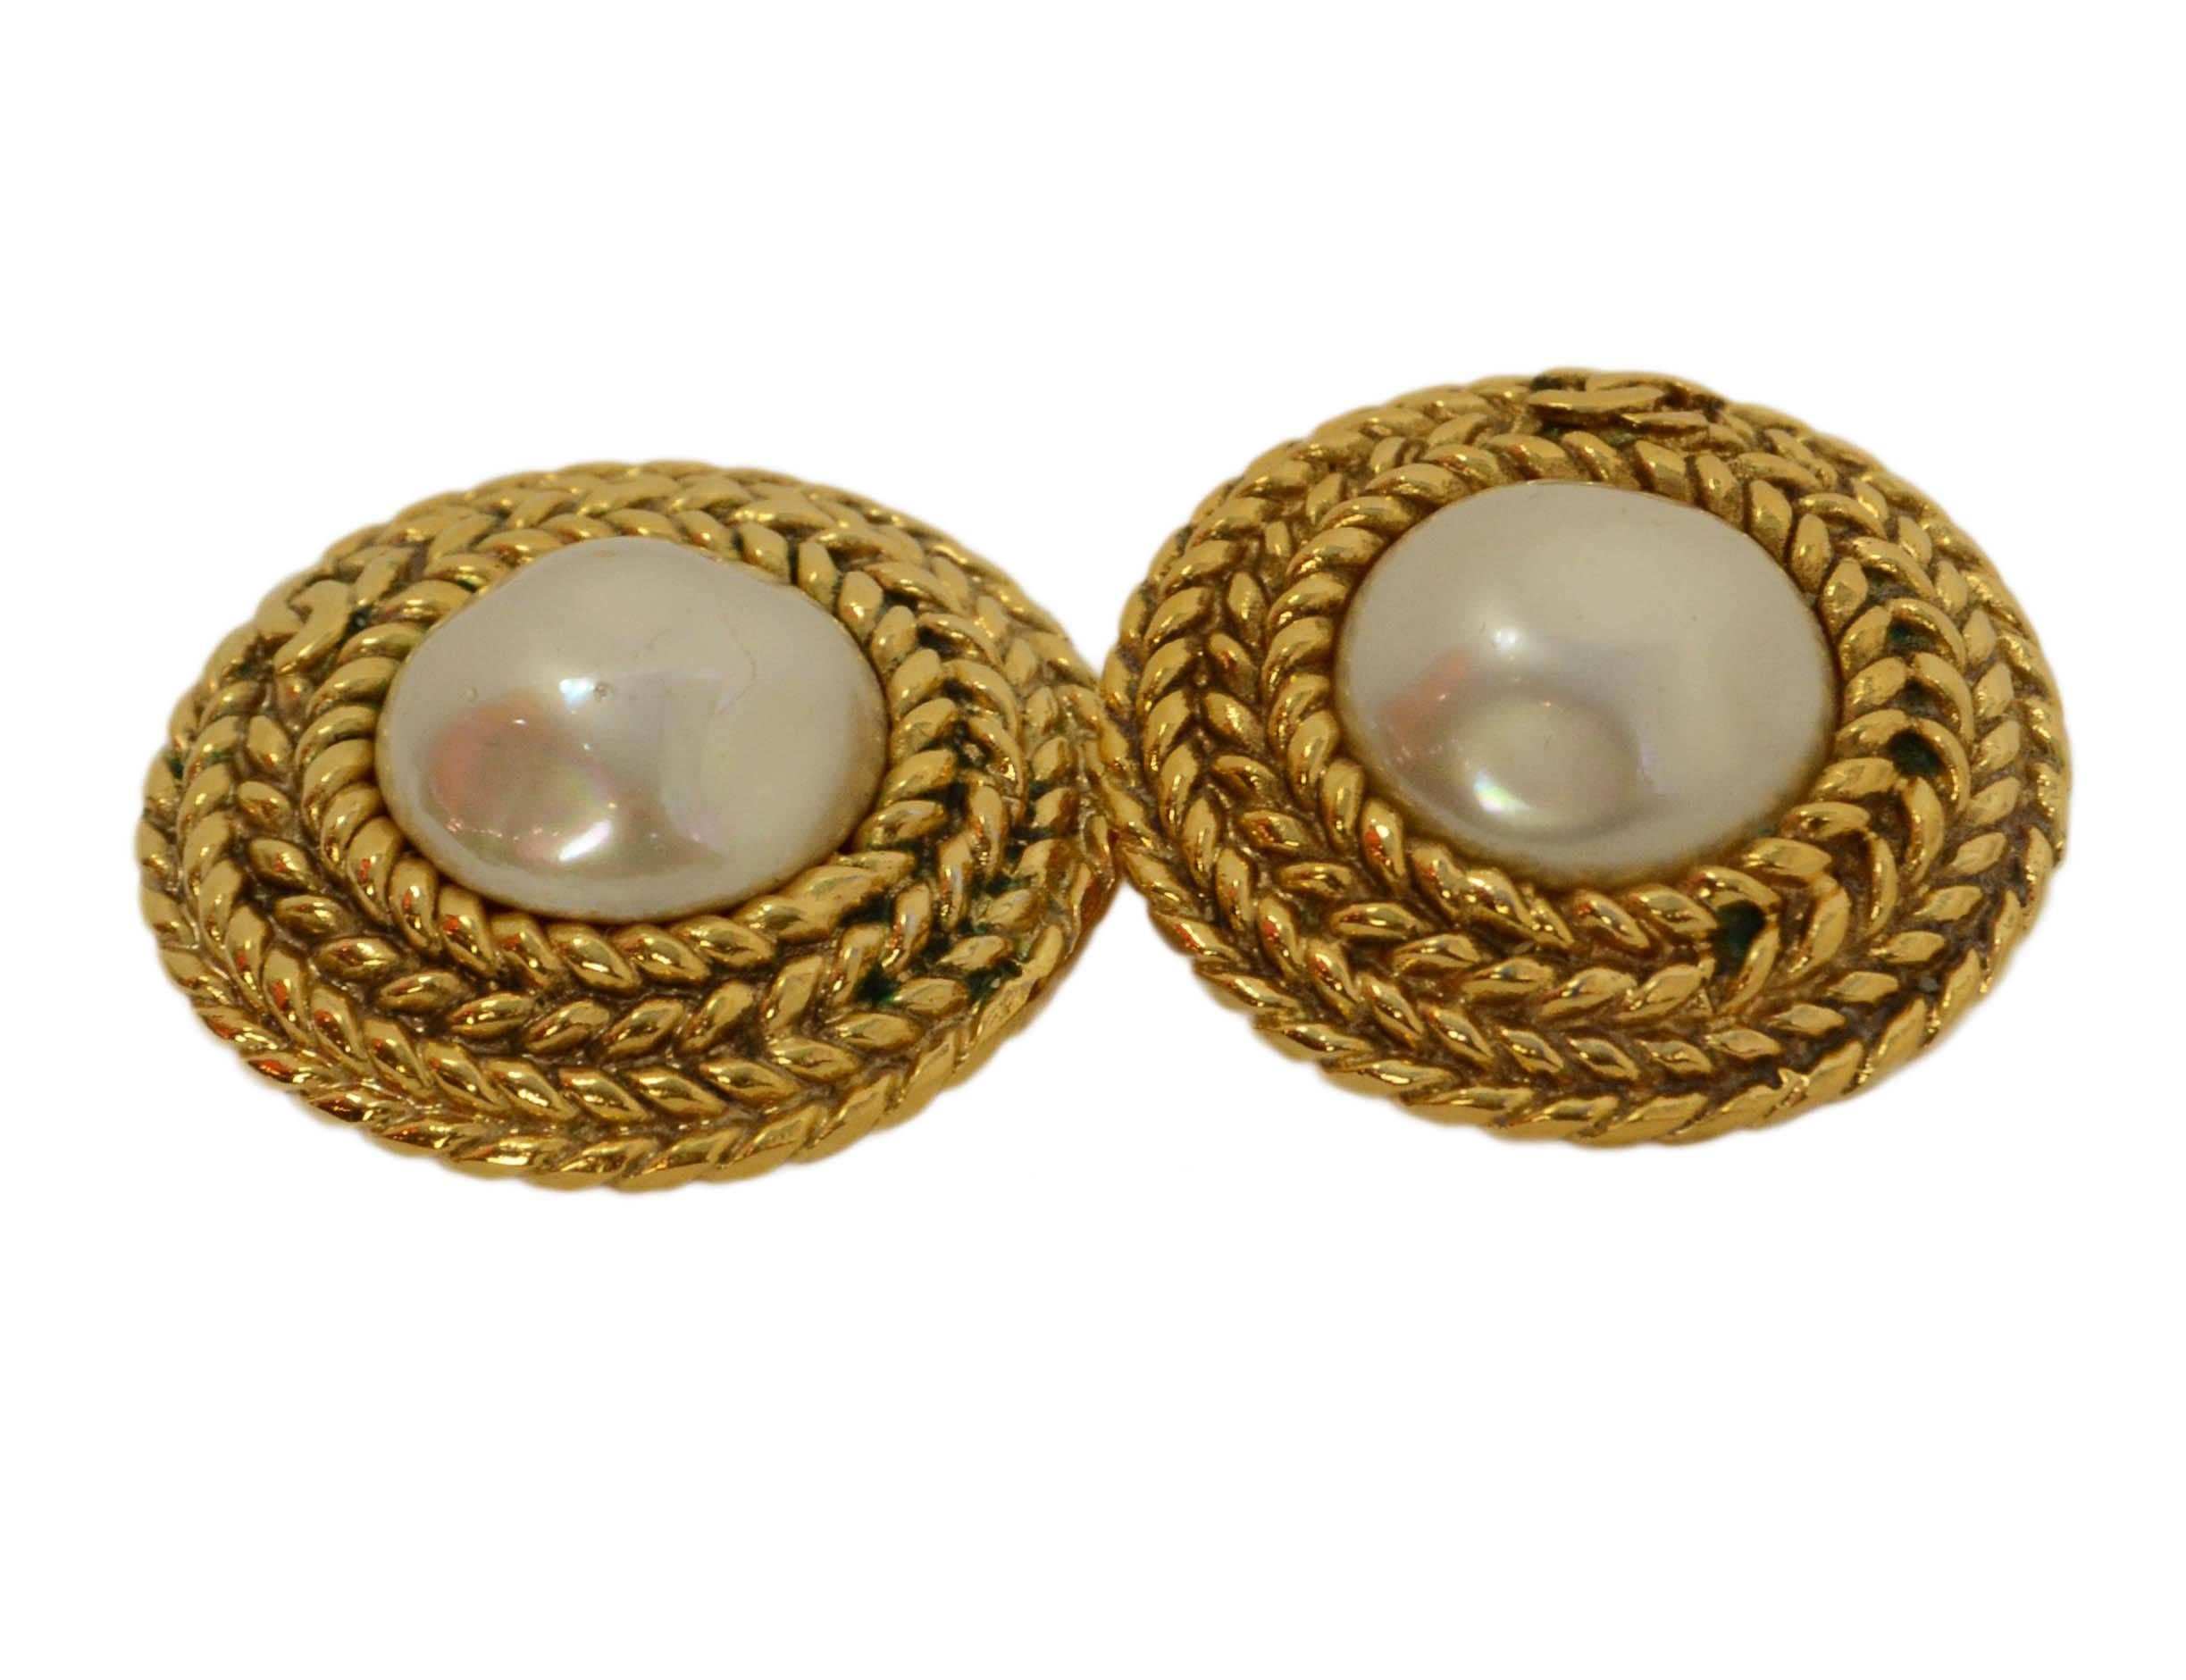 Chanel Faux Pearl Clip On Earrings With Braided Border

Made In: France

Year of Production: 1990-1992

Color: Gold, Faux Pearl

Materials: Faux pearl, metal

Closure/Opening: Clip on

Stamp: CHANEL CC MADE IN FRANCE

Overall